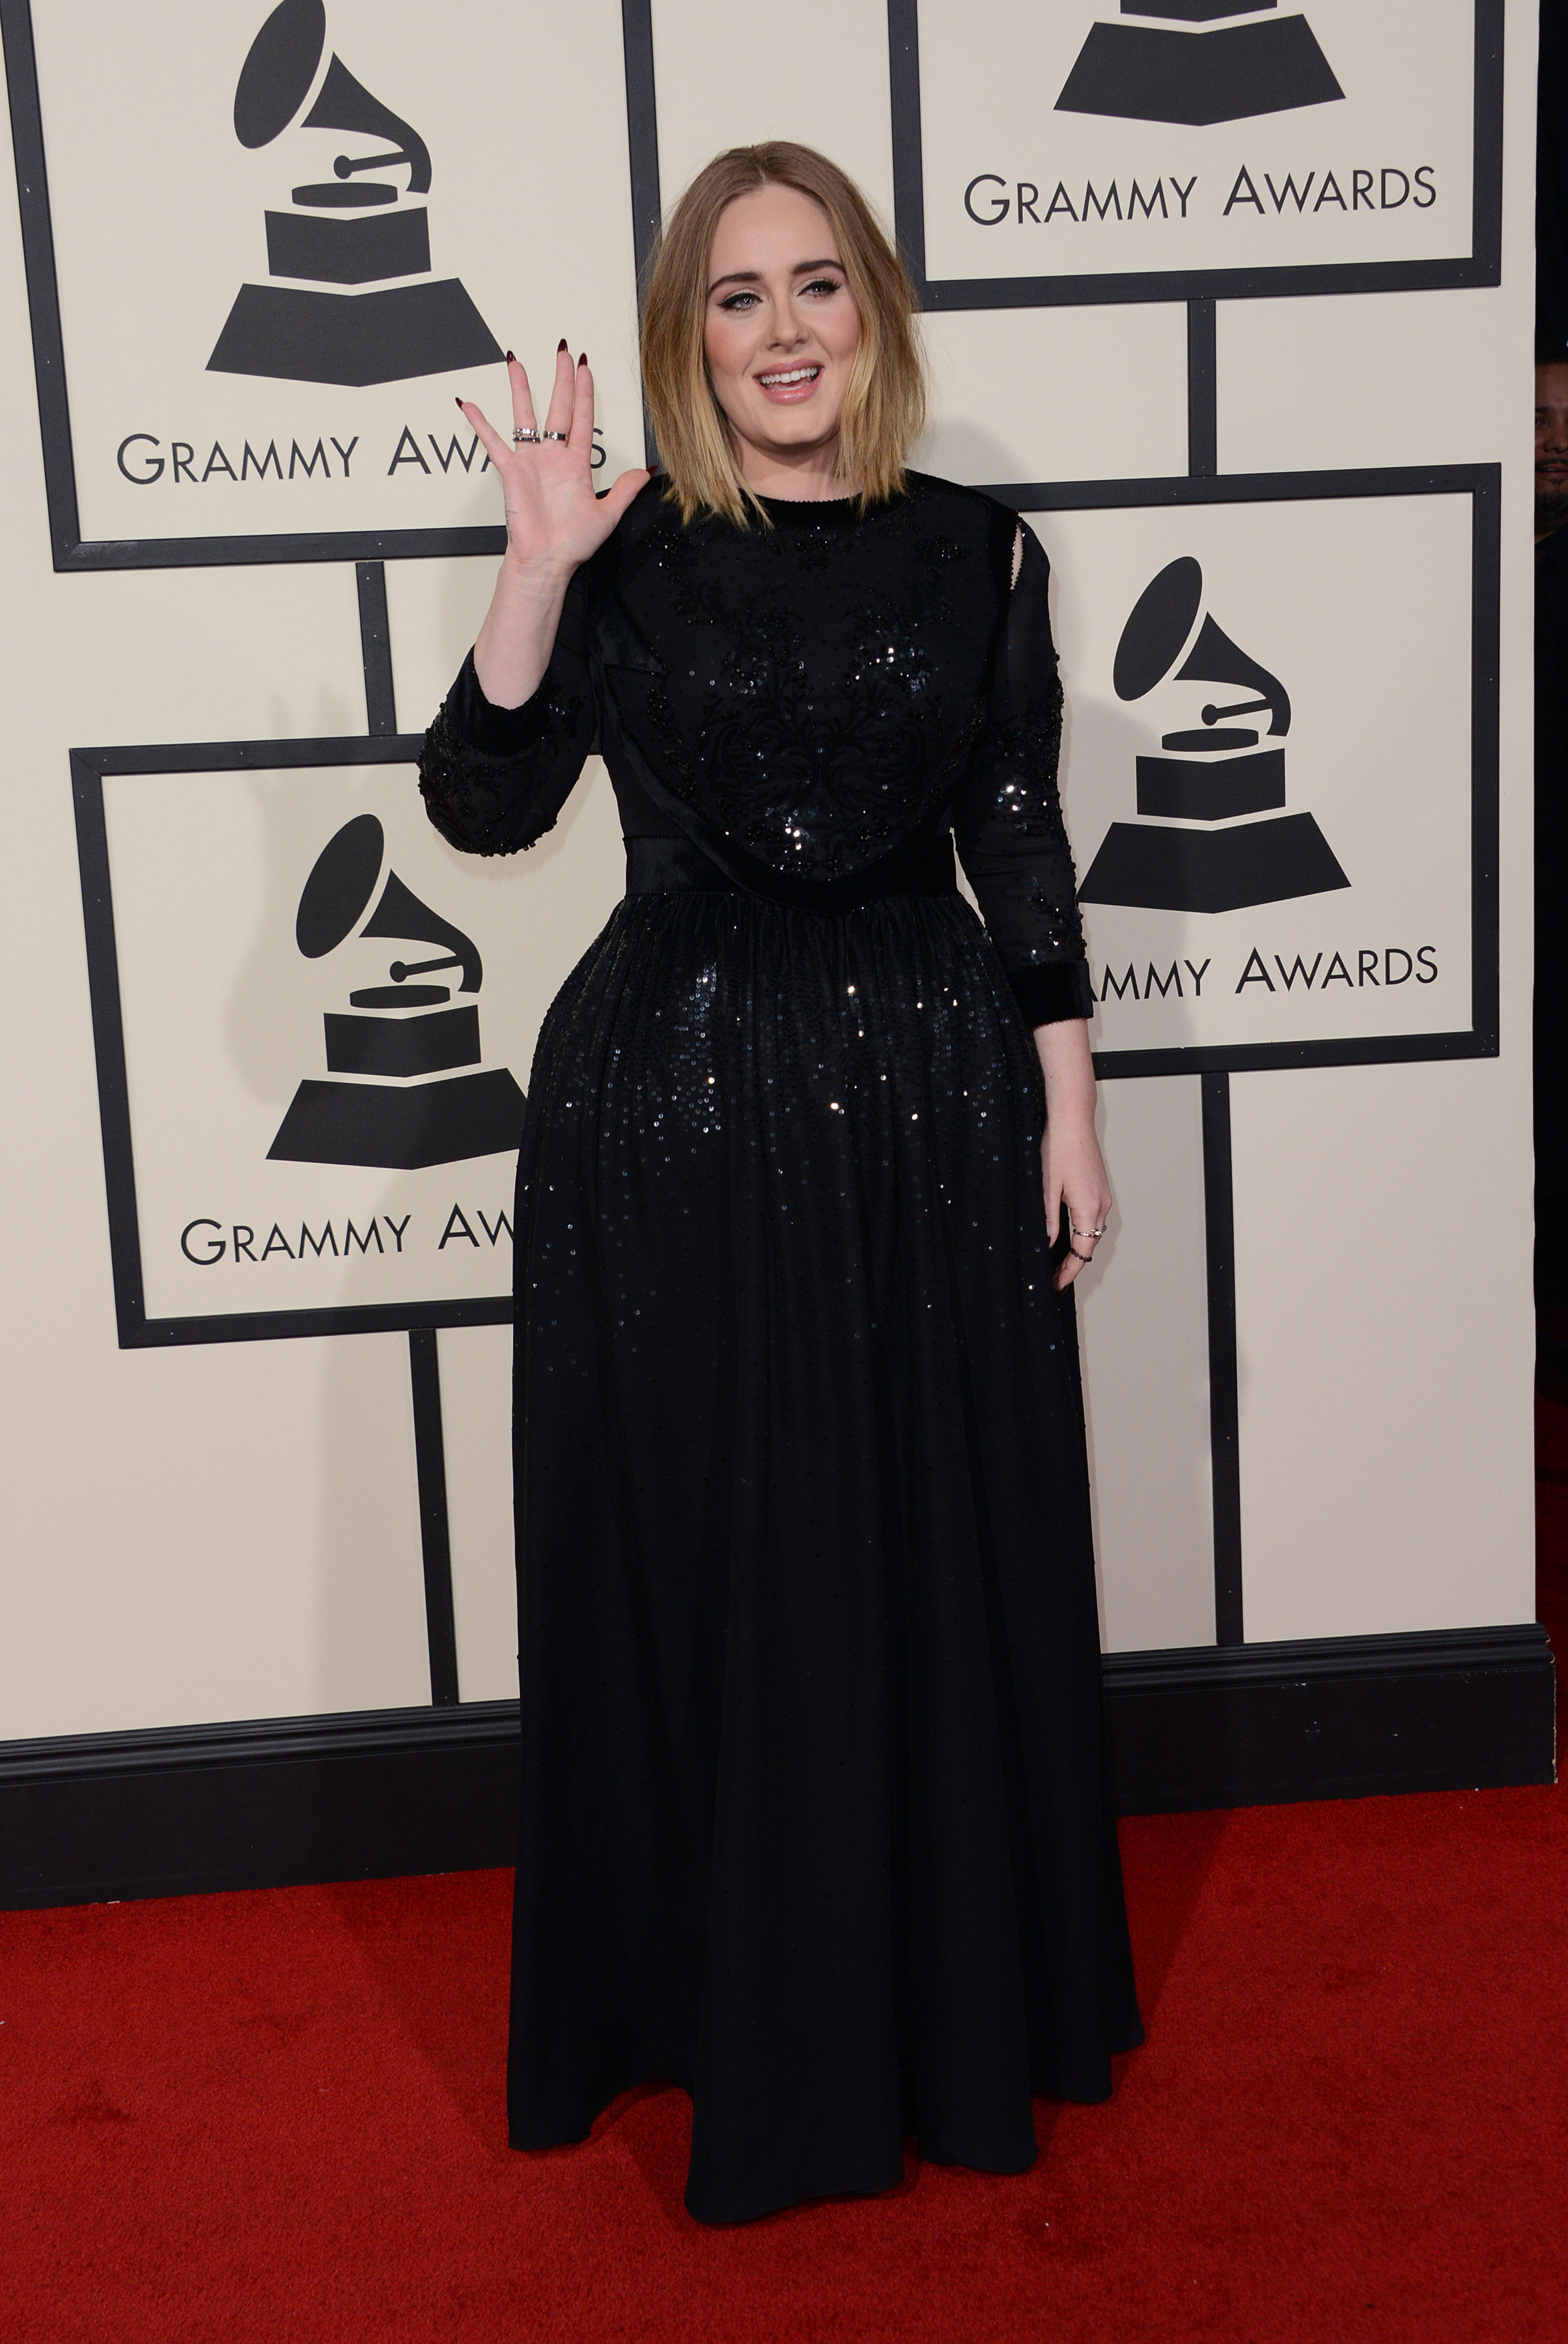 Grammy Awards Well Played, Adele in Givenchy